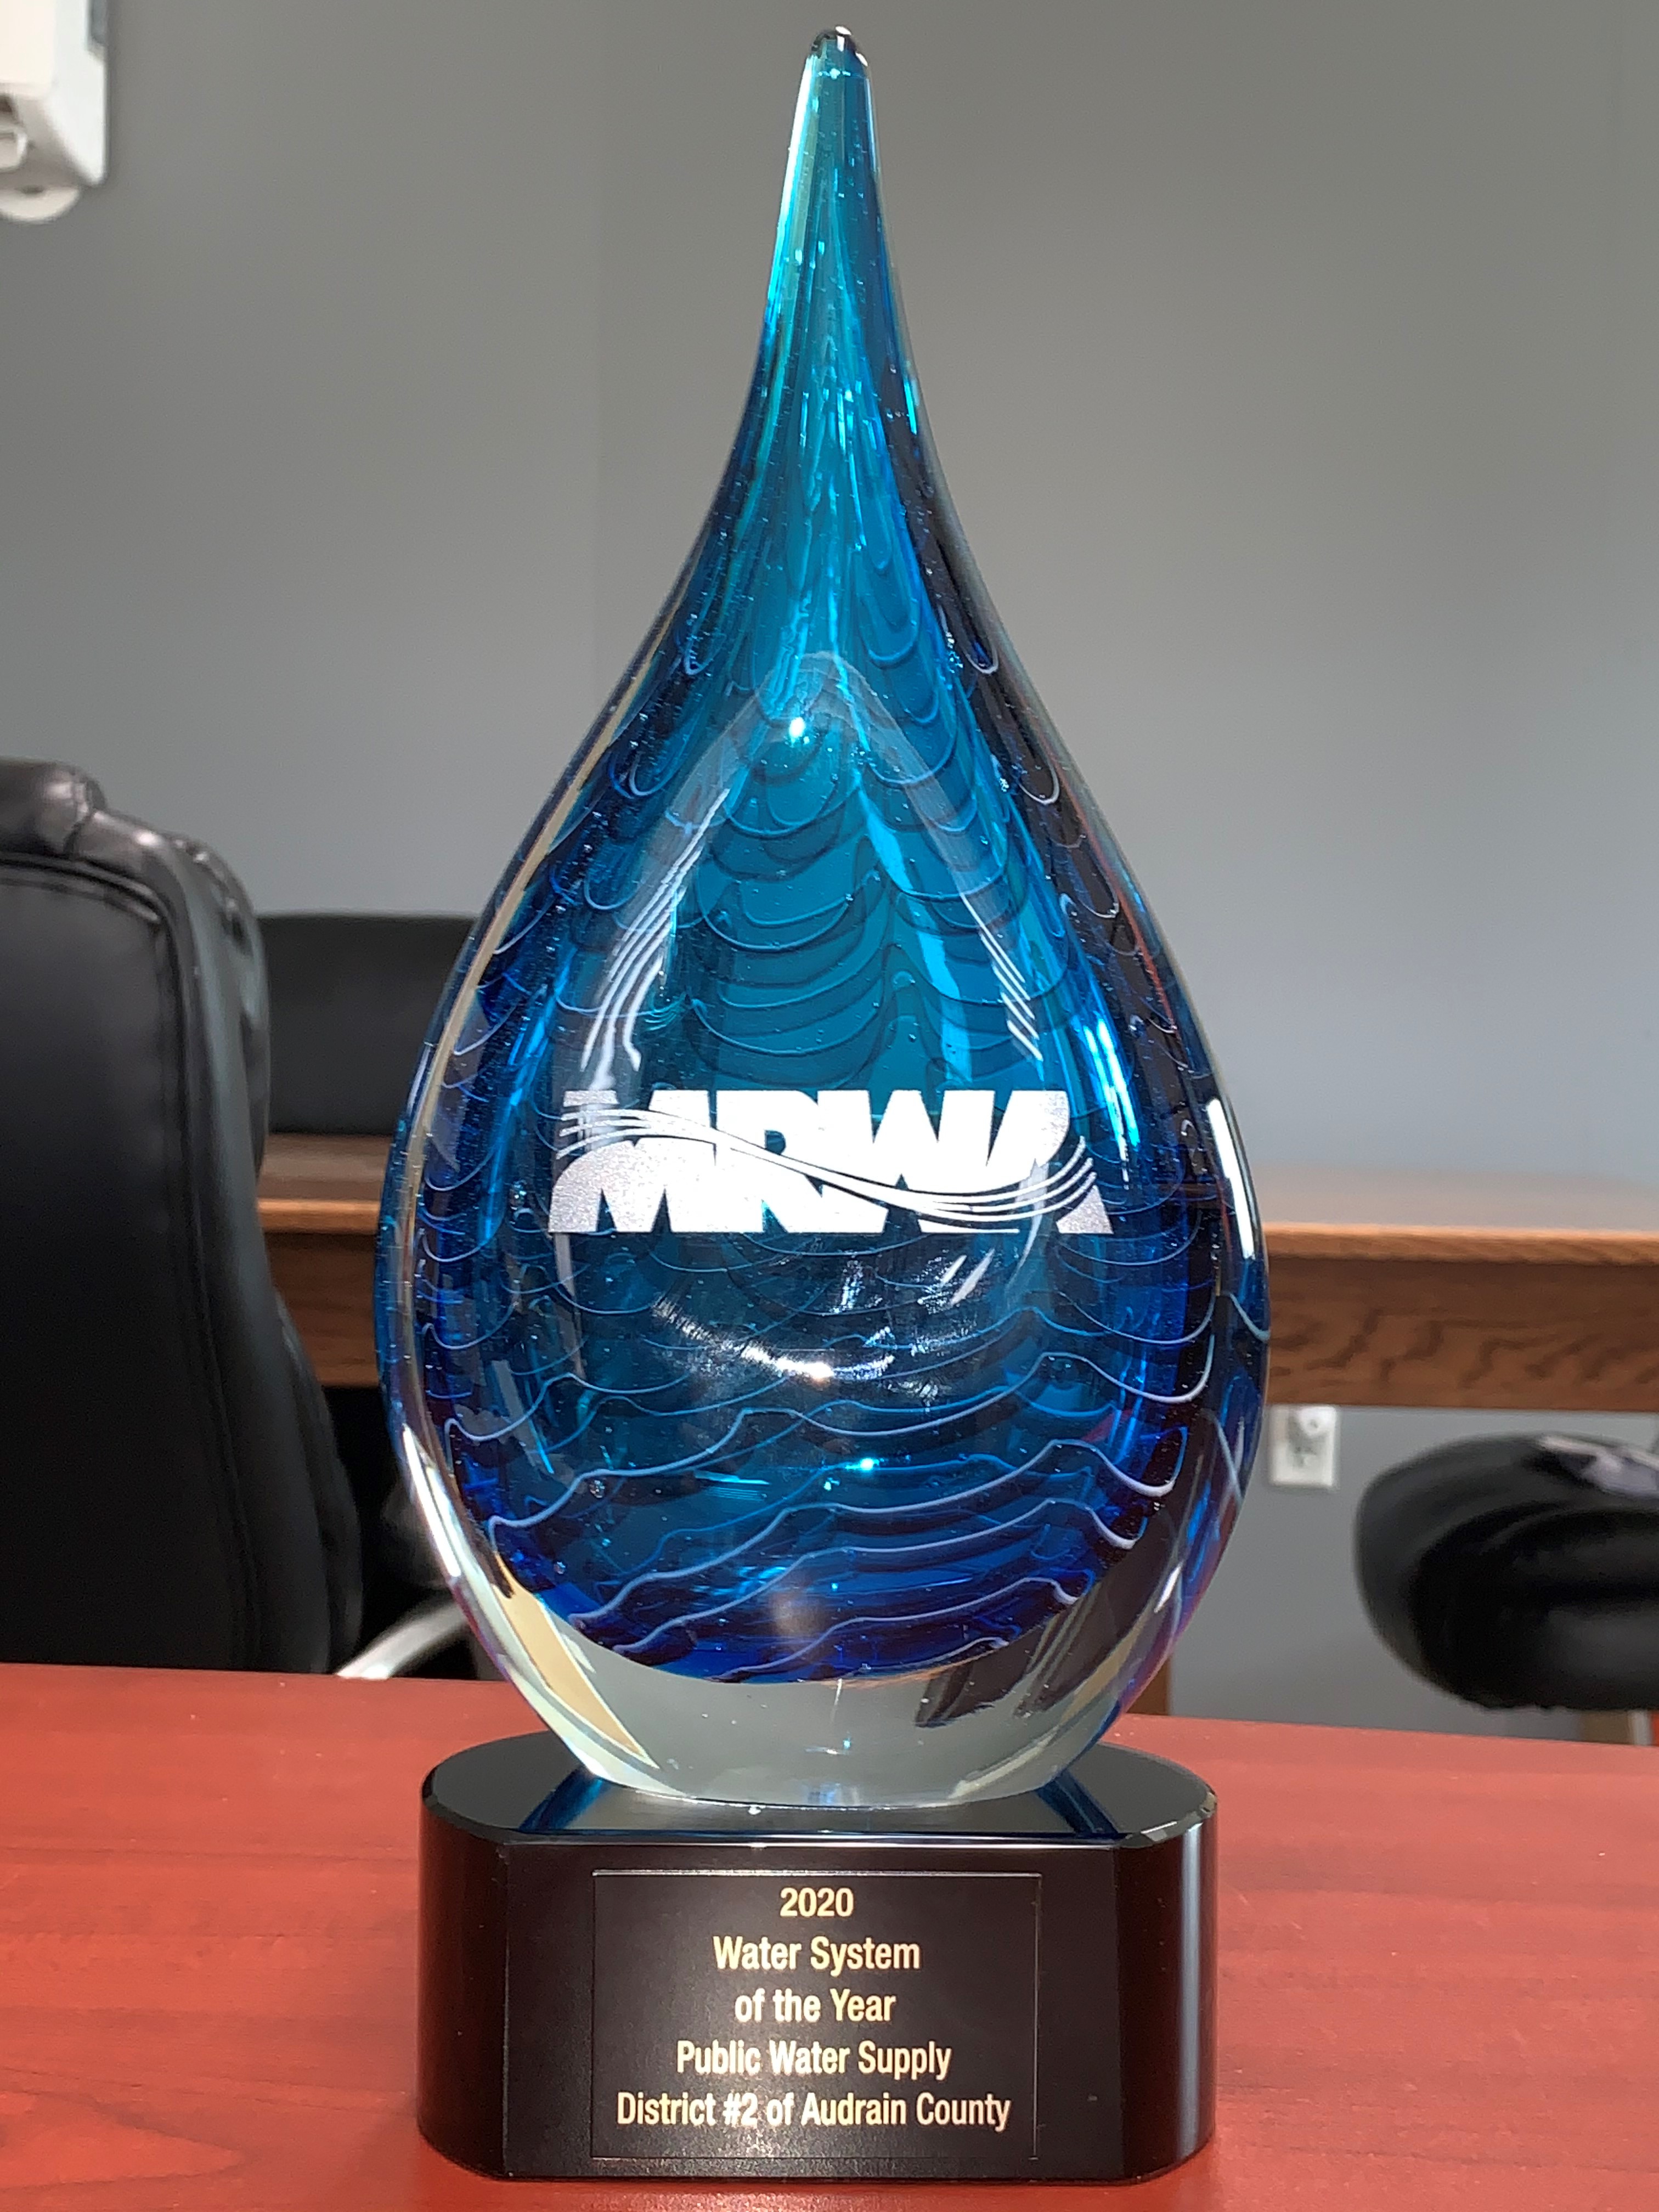 Public Water Supply District #2 of Audrain County Wins Award